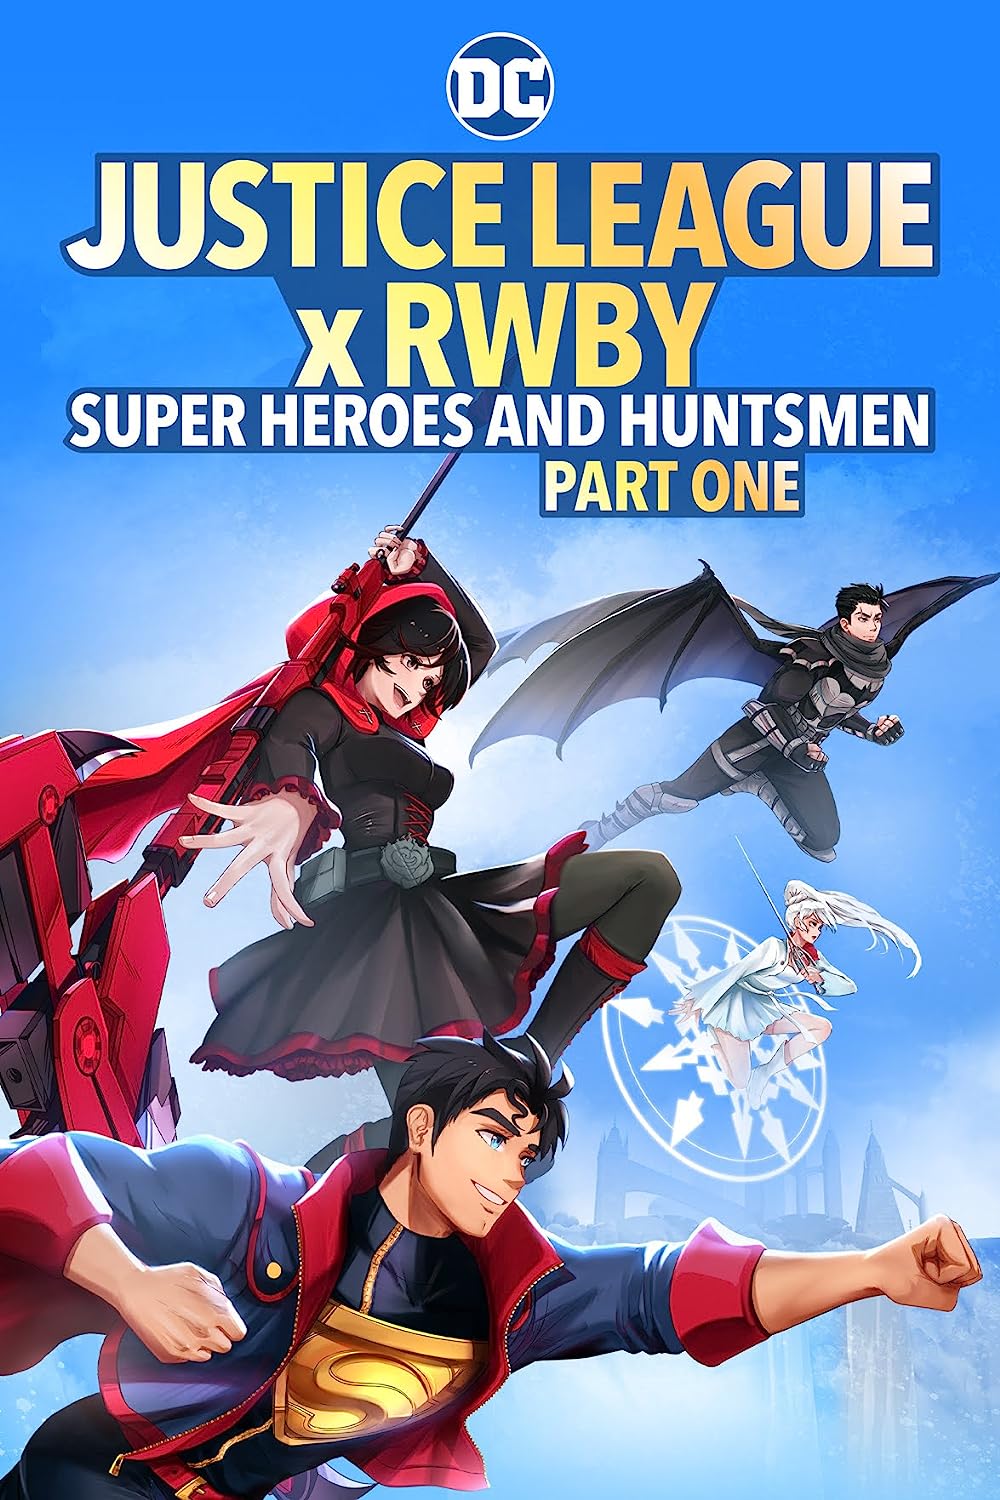 Poster Phim Justice League x RWBY: Super Heroes and Huntsmen Part One (Justice League x RWBY: Super Heroes and Huntsmen Part One)